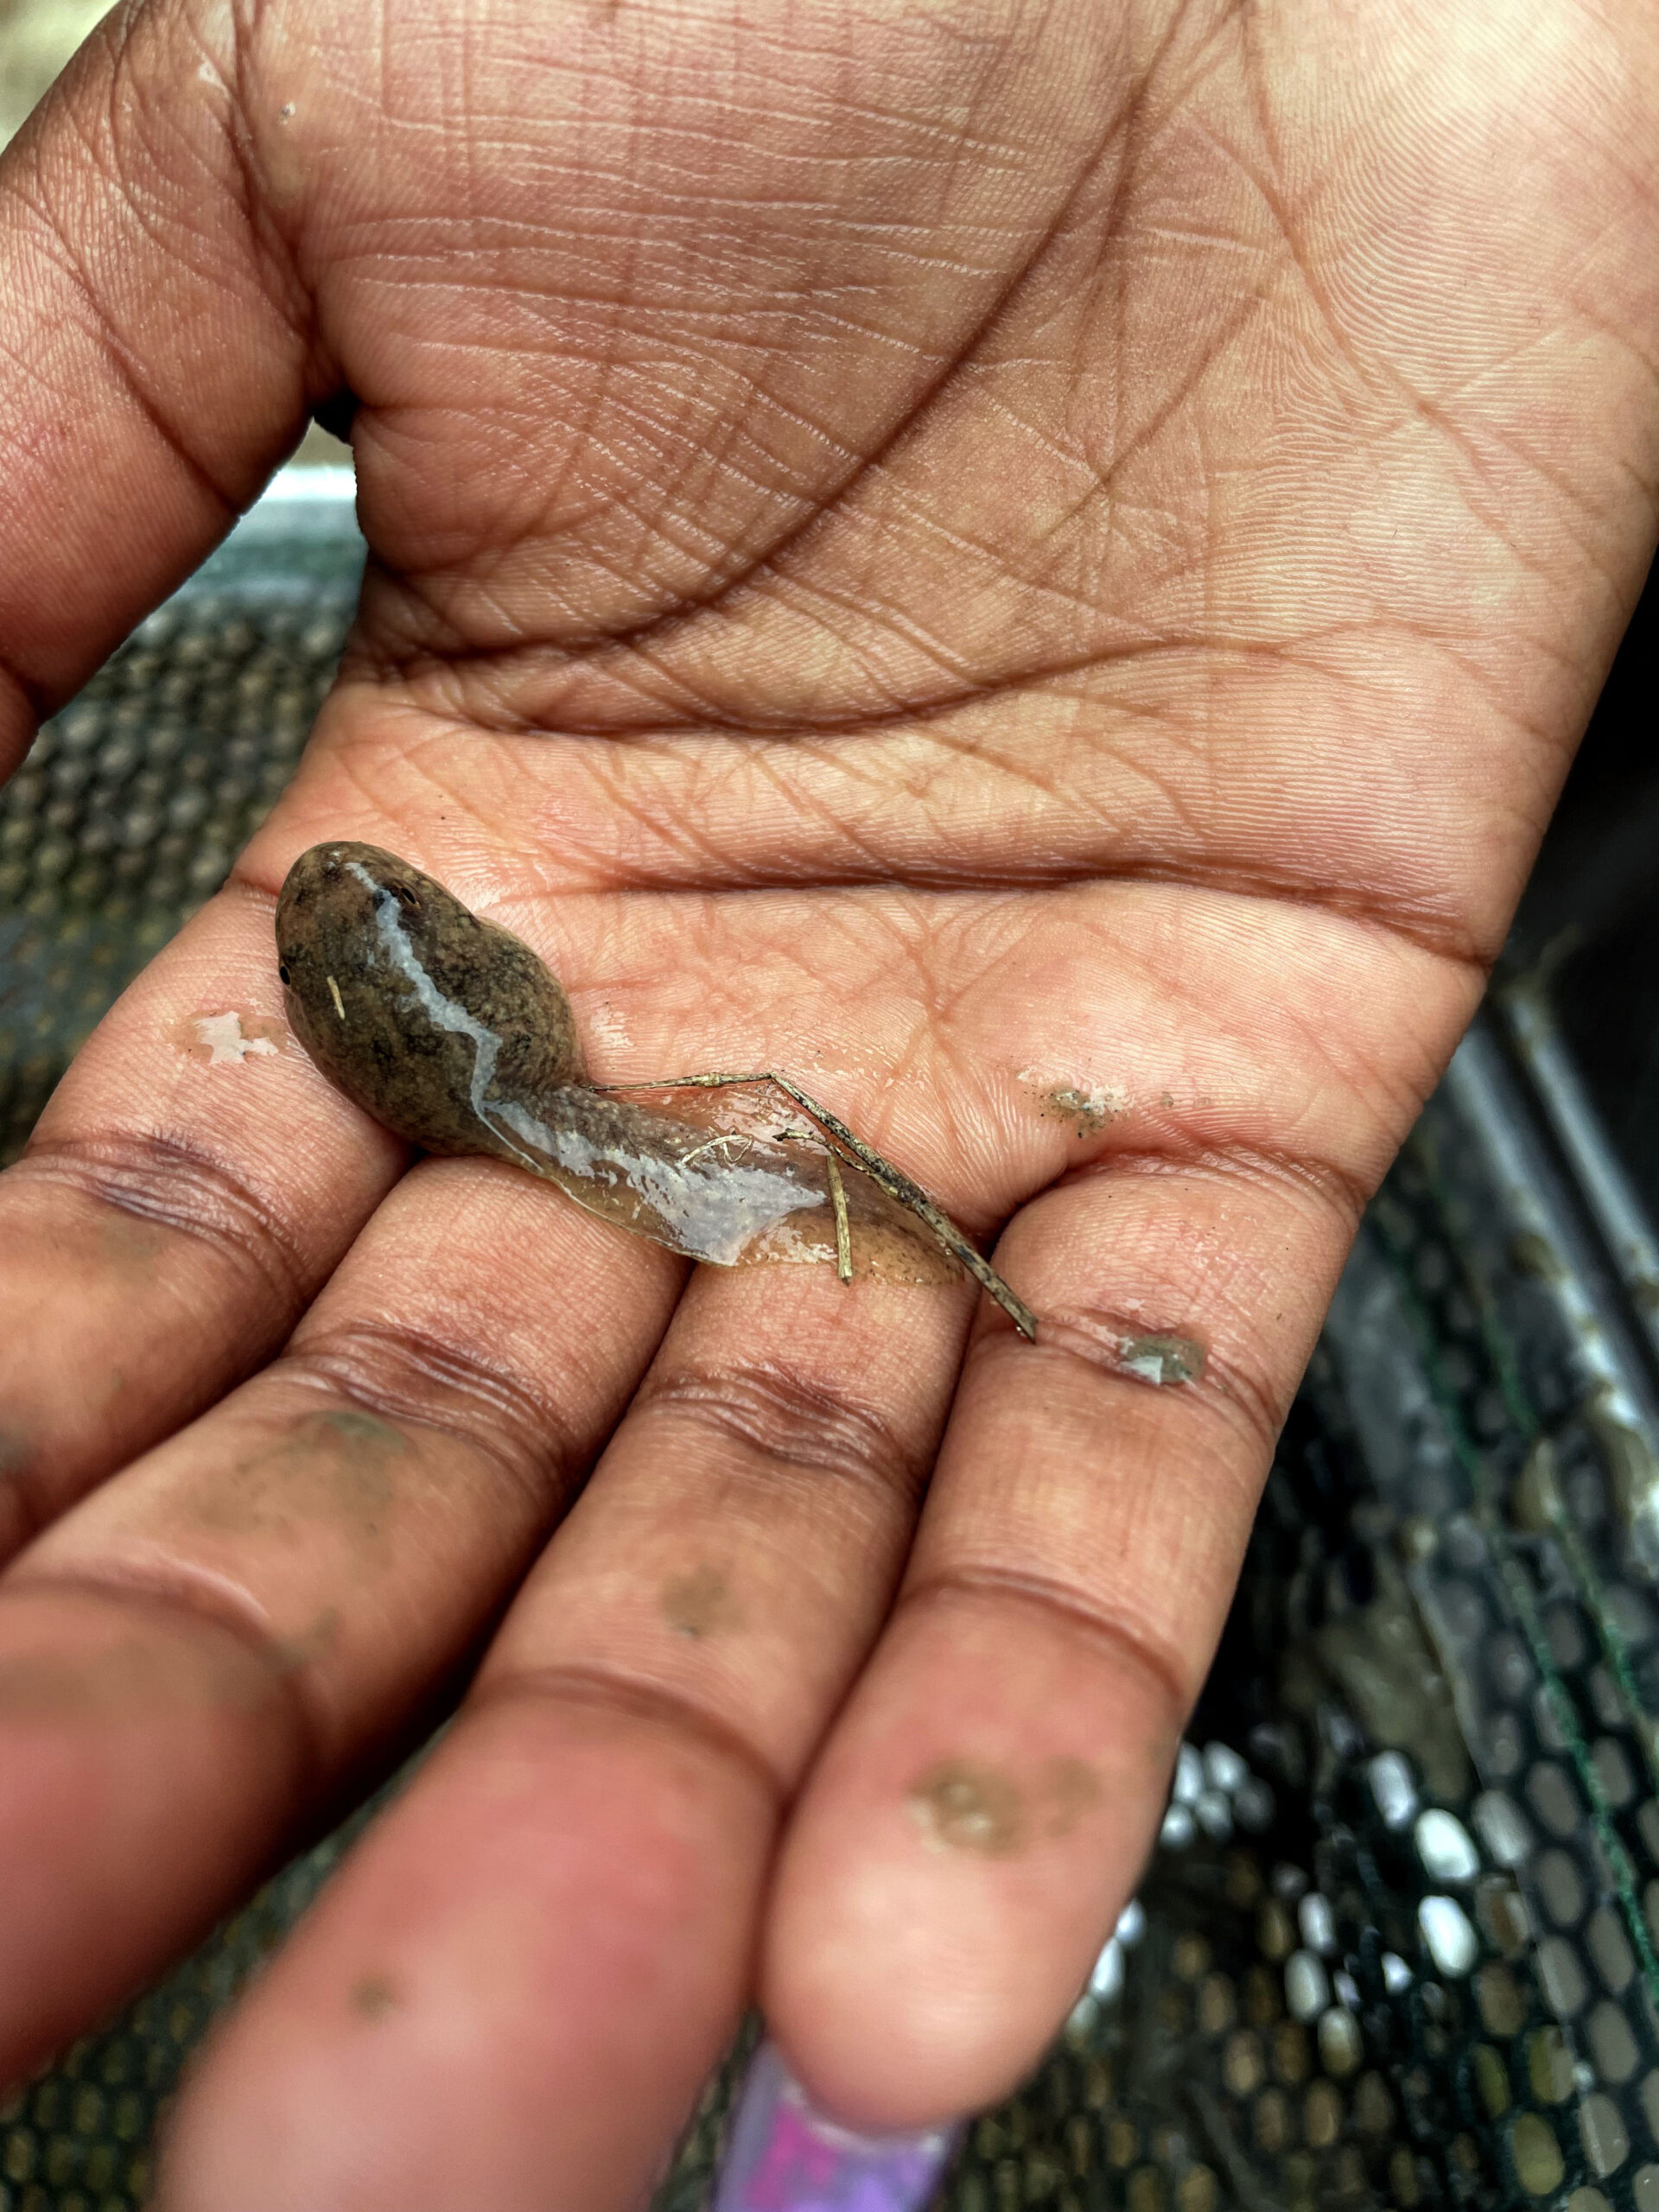 A tadpole lies within someone's hand.